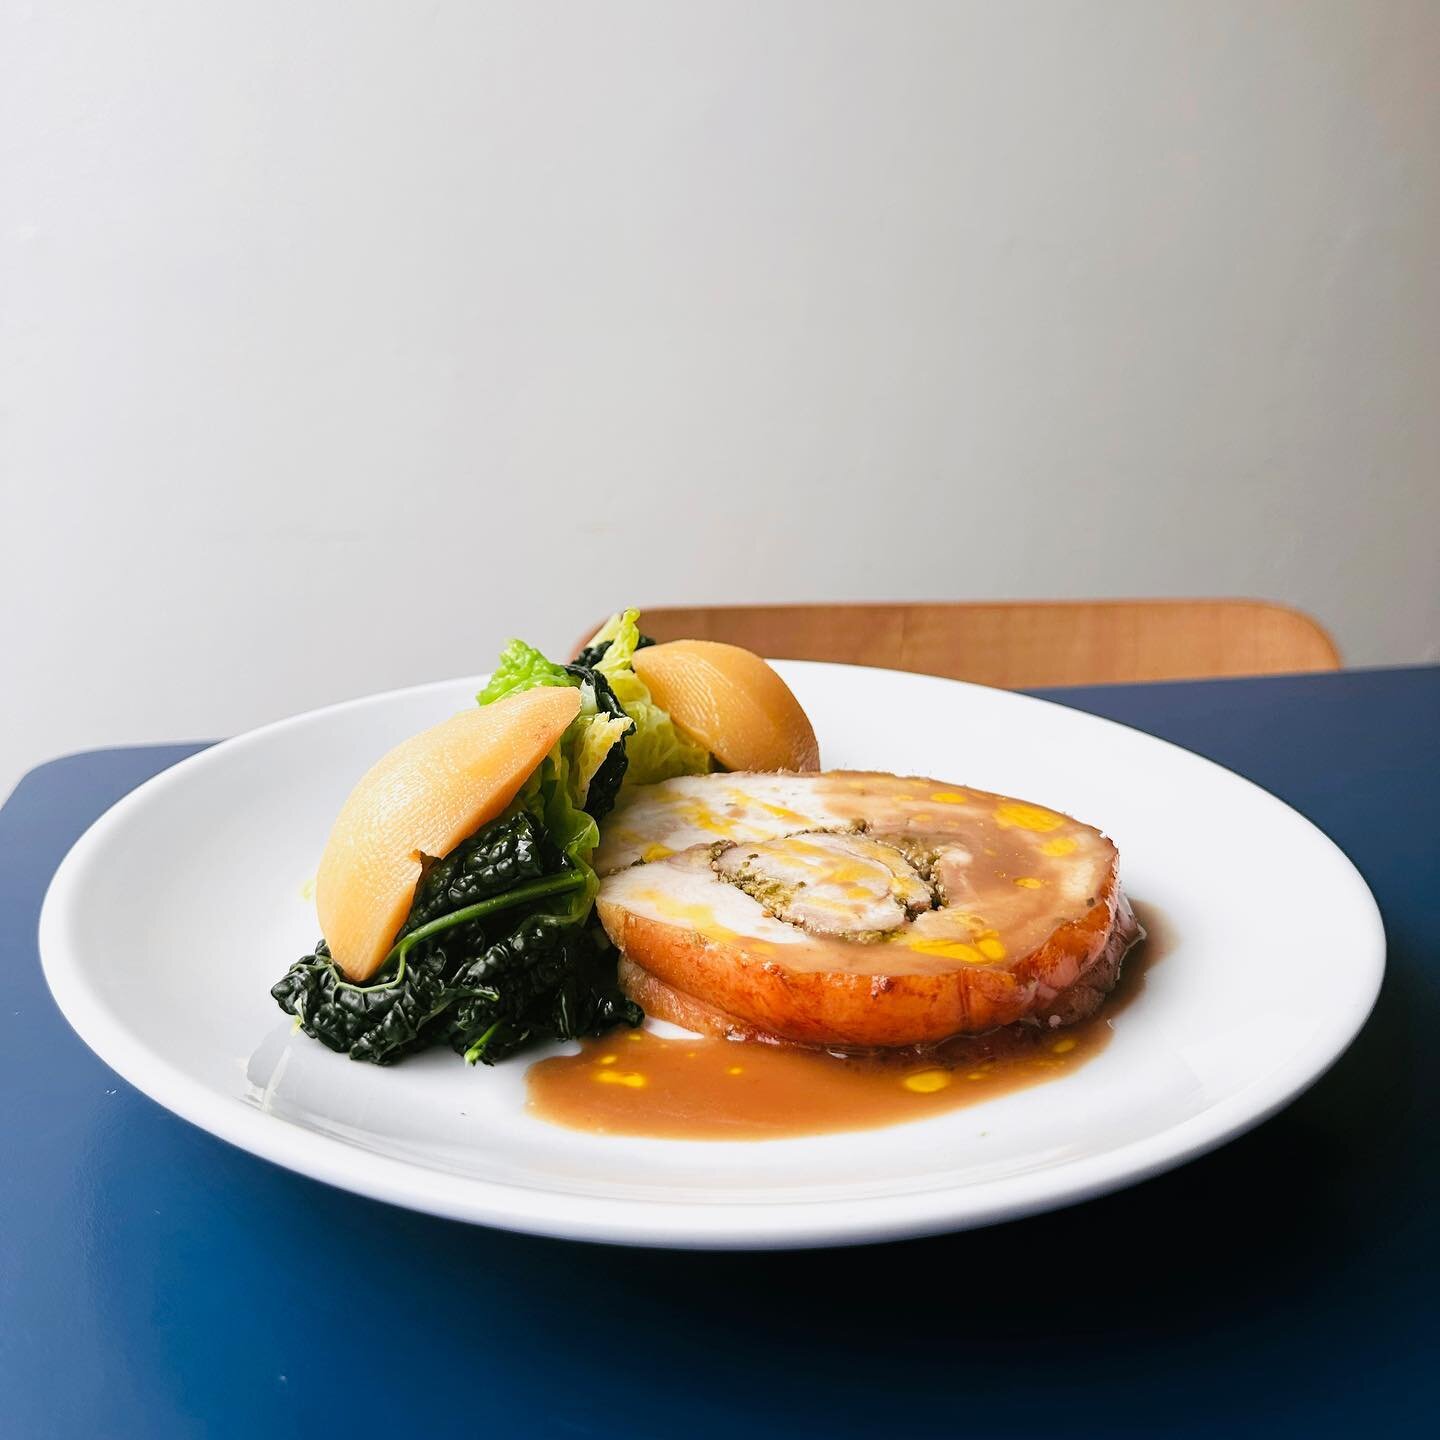 Porchetta, Baked Quince &amp; Seasonal Greens. On tonight and all this month.

This week our Wednesday &amp; Thursday offering is sausage and mash with a glass of wine for &pound;20.

We&rsquo;ve gone again with a coarse ground Italian fennel sausage